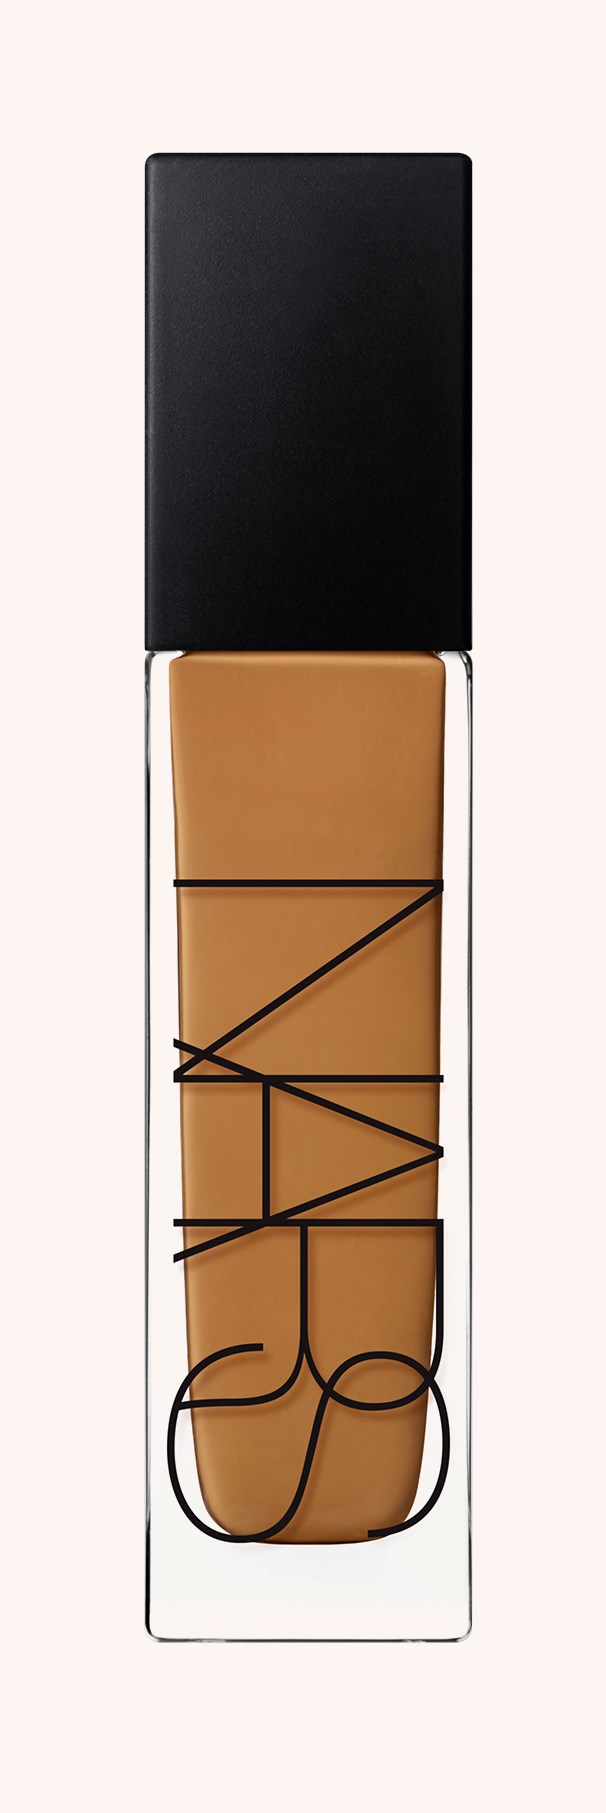 Natural Radiant Longwear Foundation Macao